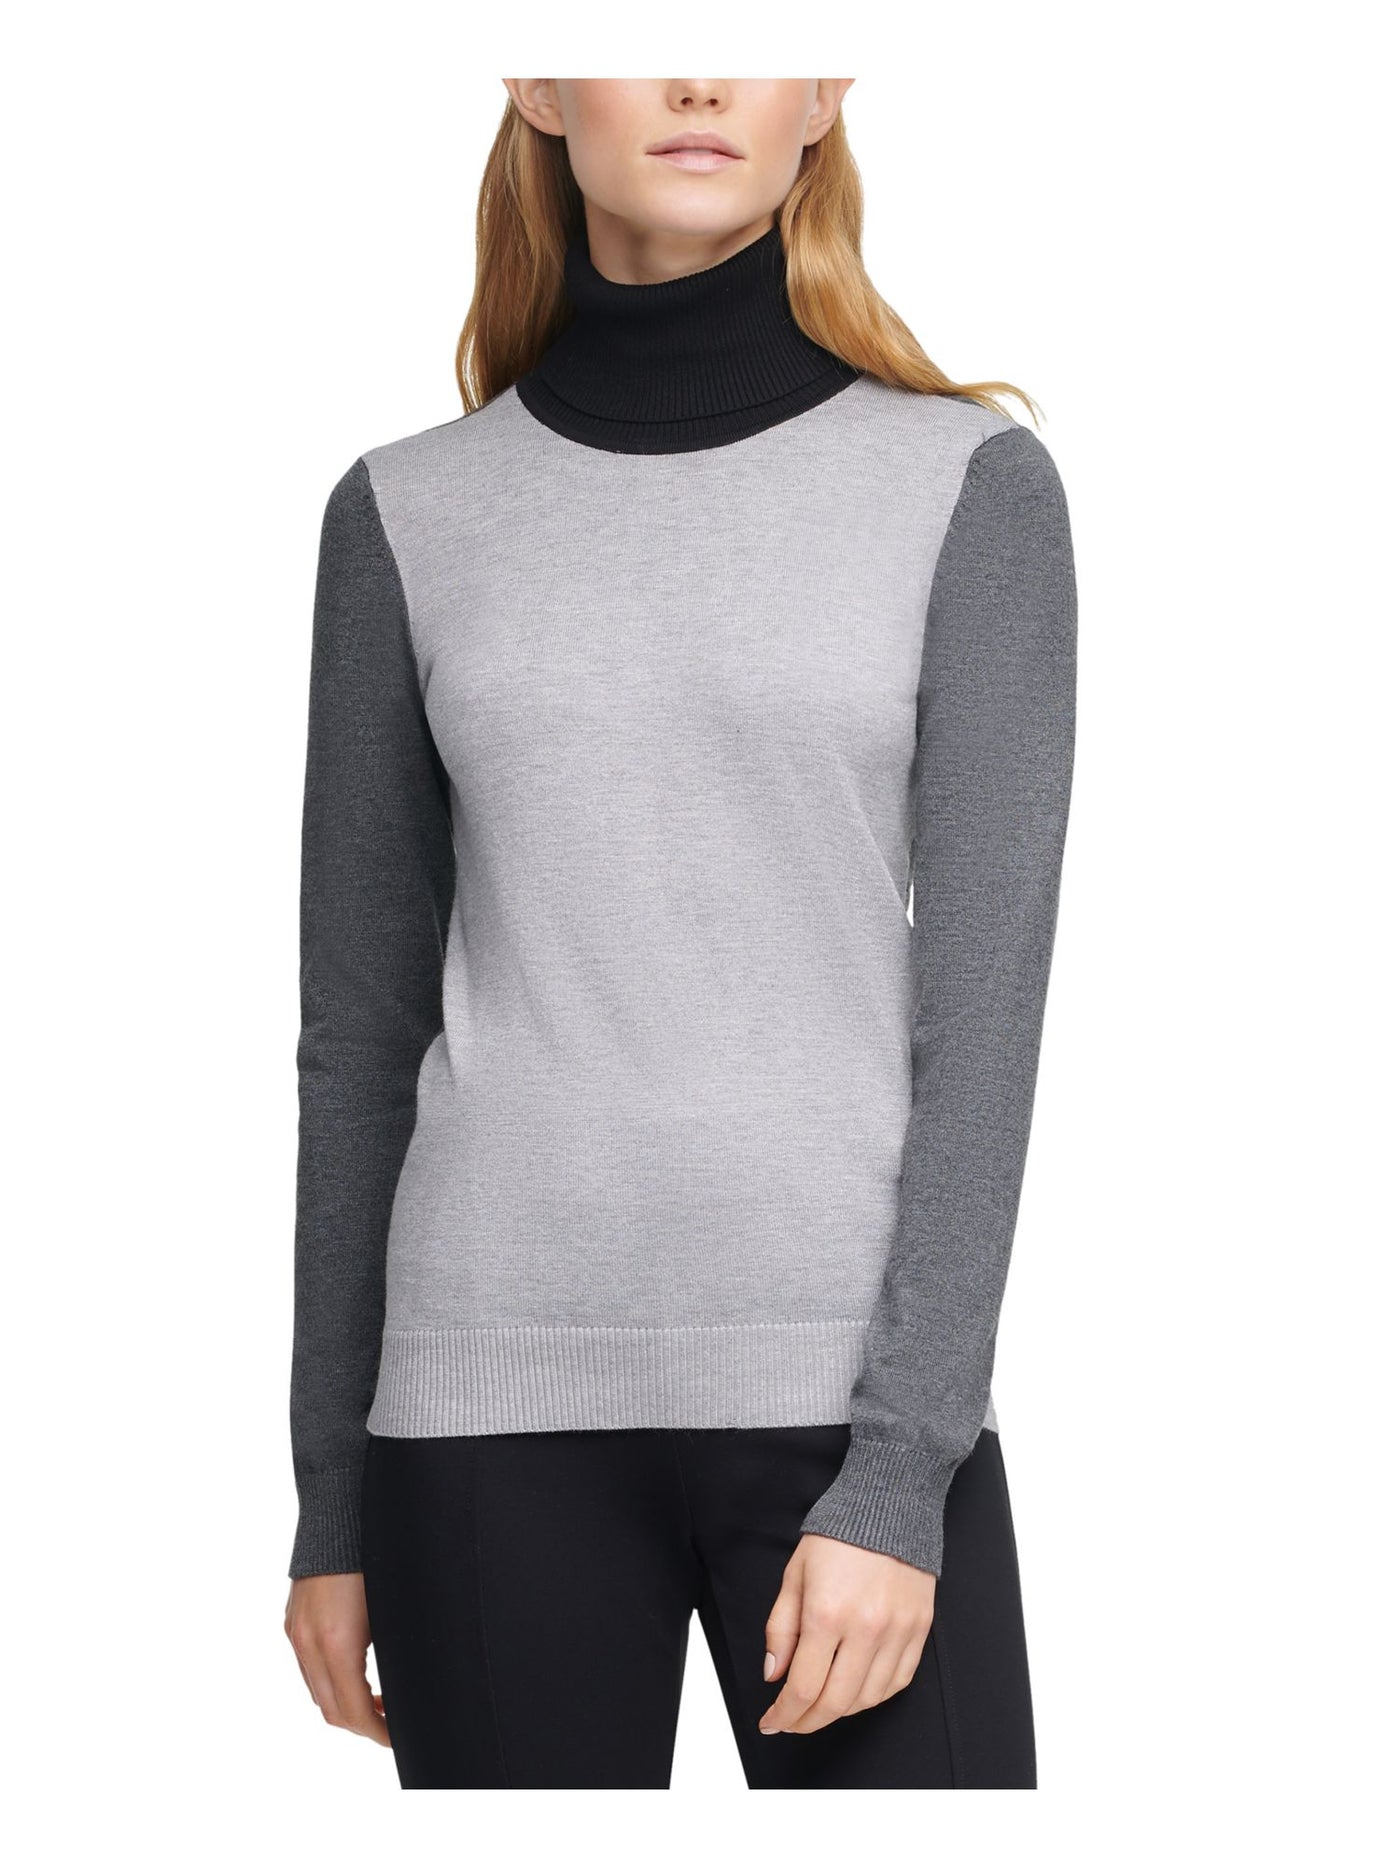 CALVIN KLEIN Womens Gray Stretch Color Block Long Sleeve Turtle Neck Sweater XS